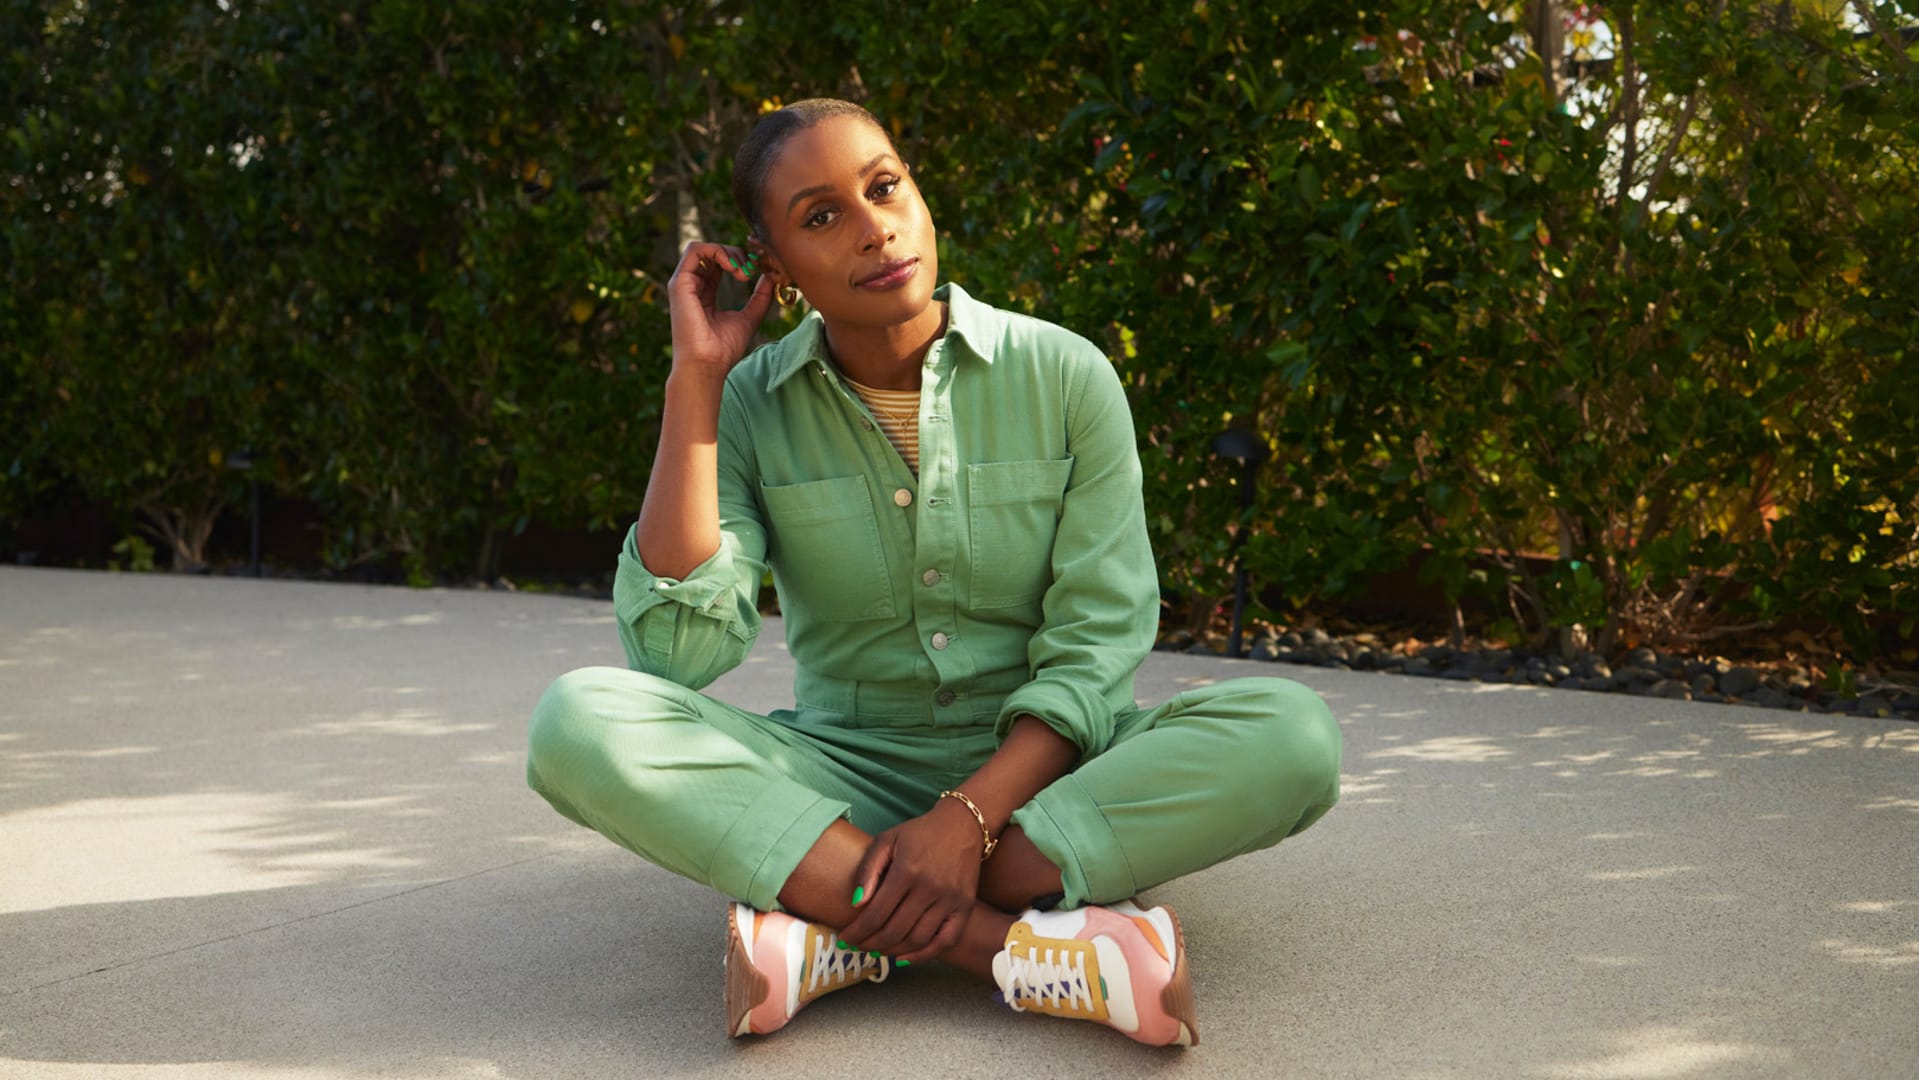 Insecure’s Issa Rae: ‘There are still so many stipulations about what Black stories I am allowed to tell’